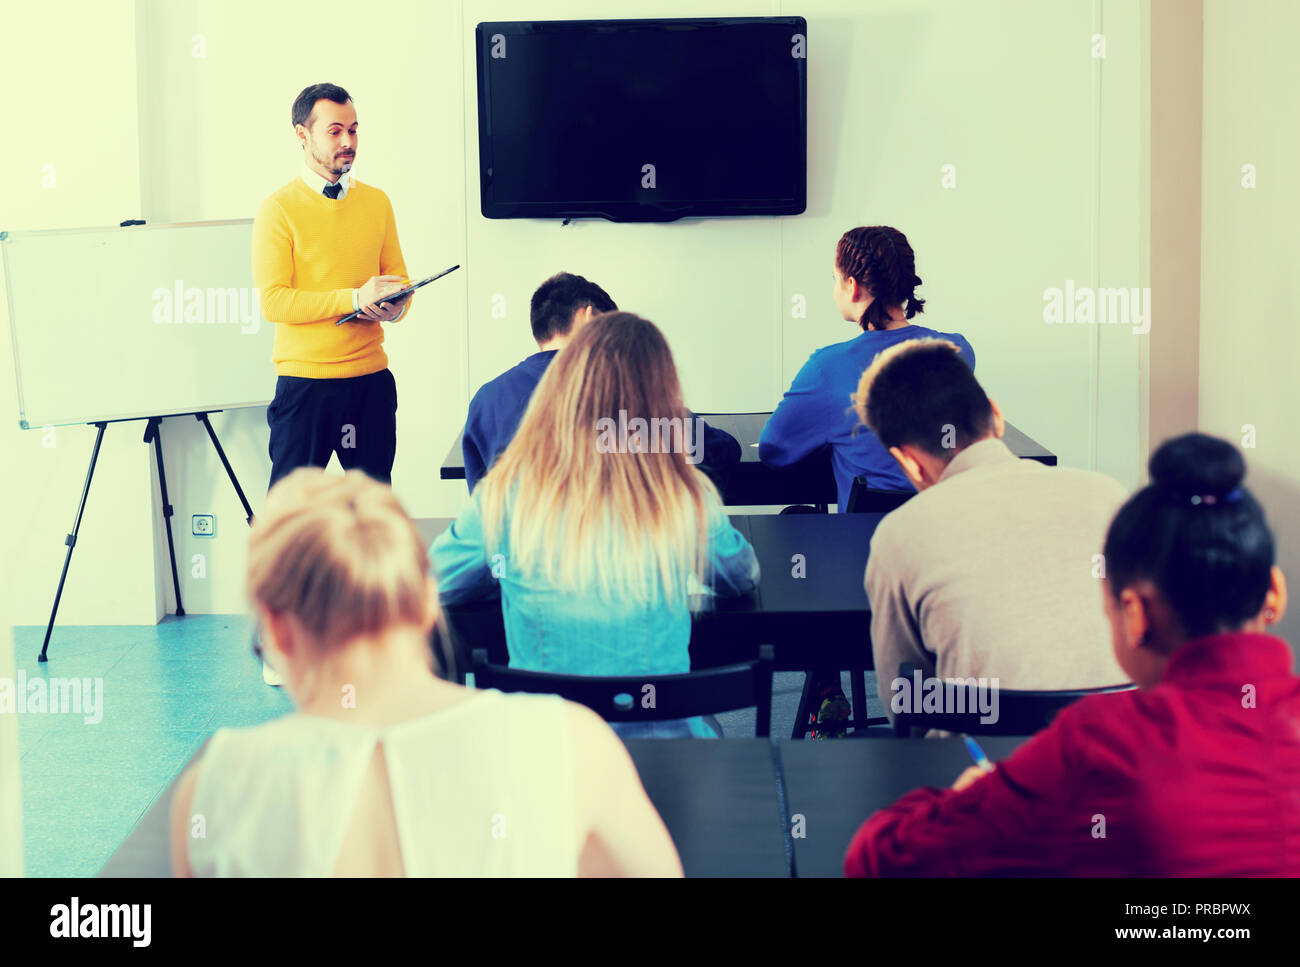 Teacher is monitoring students during revision work in class. Stock Photo